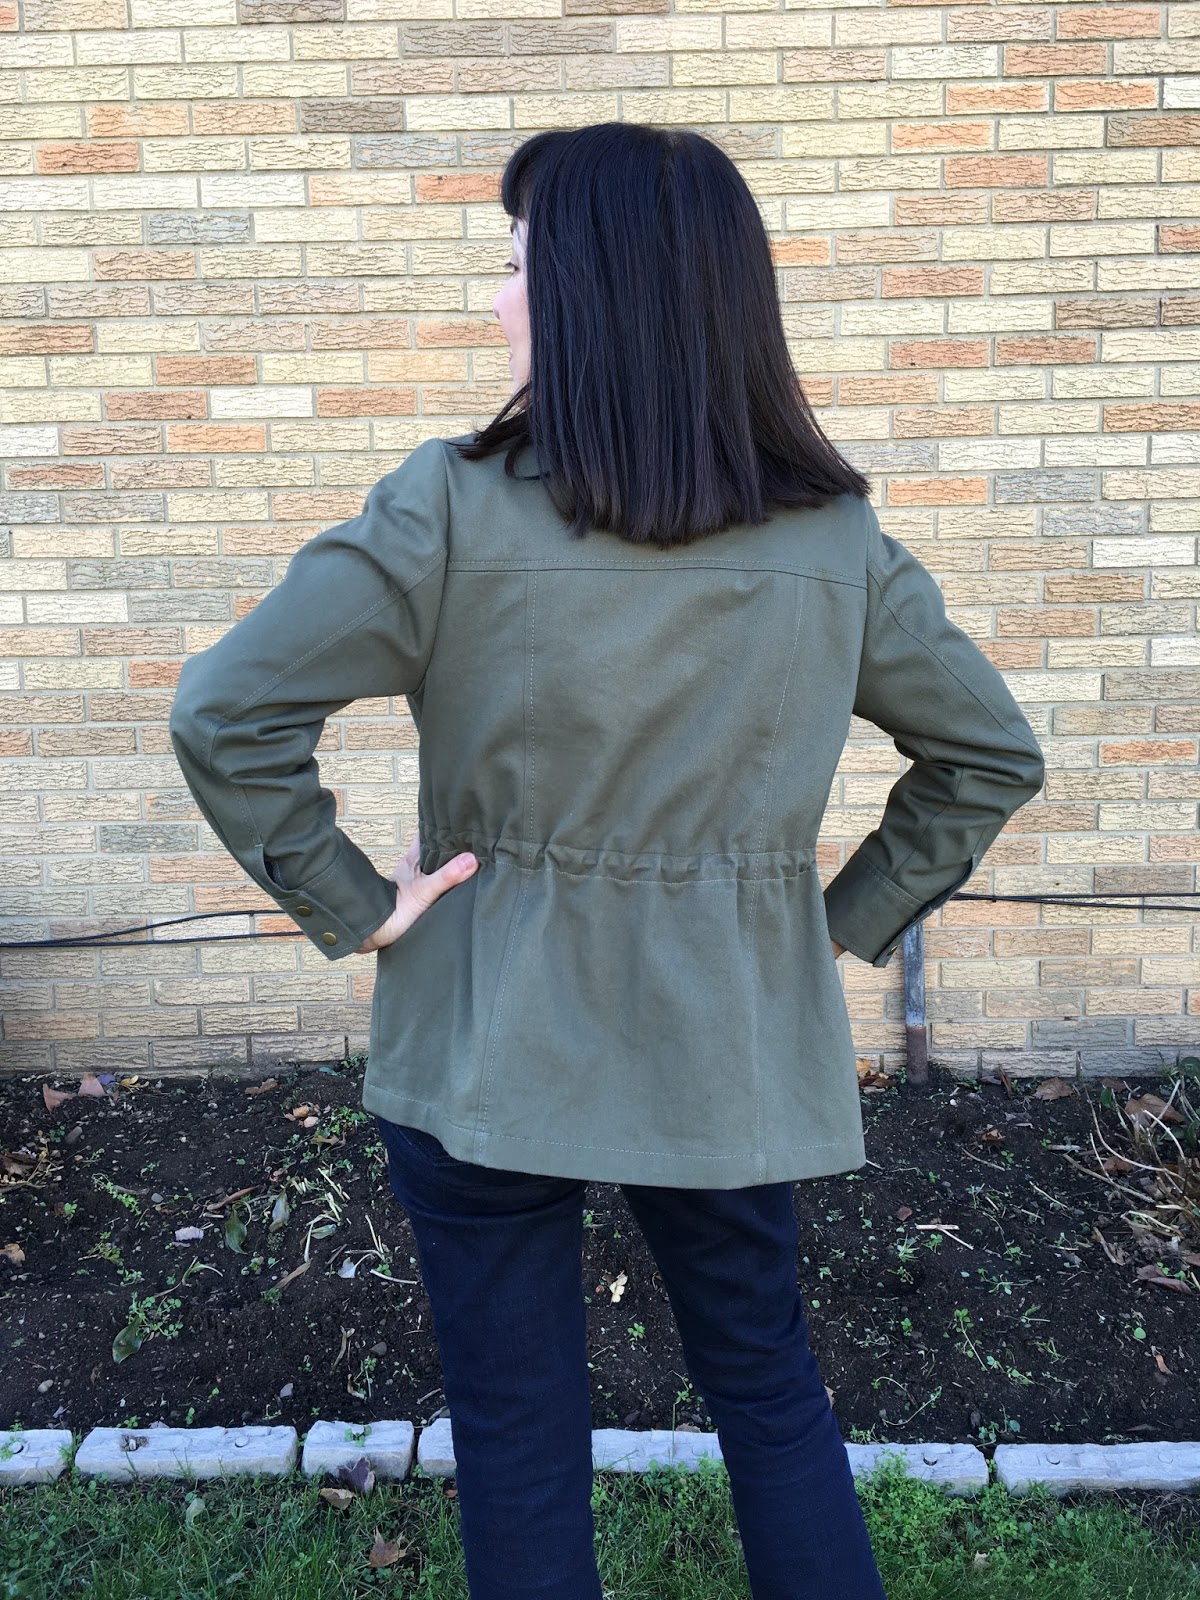 Sew Much Fashion : Butterick 5616 (Modified) - Olive Green Jacket